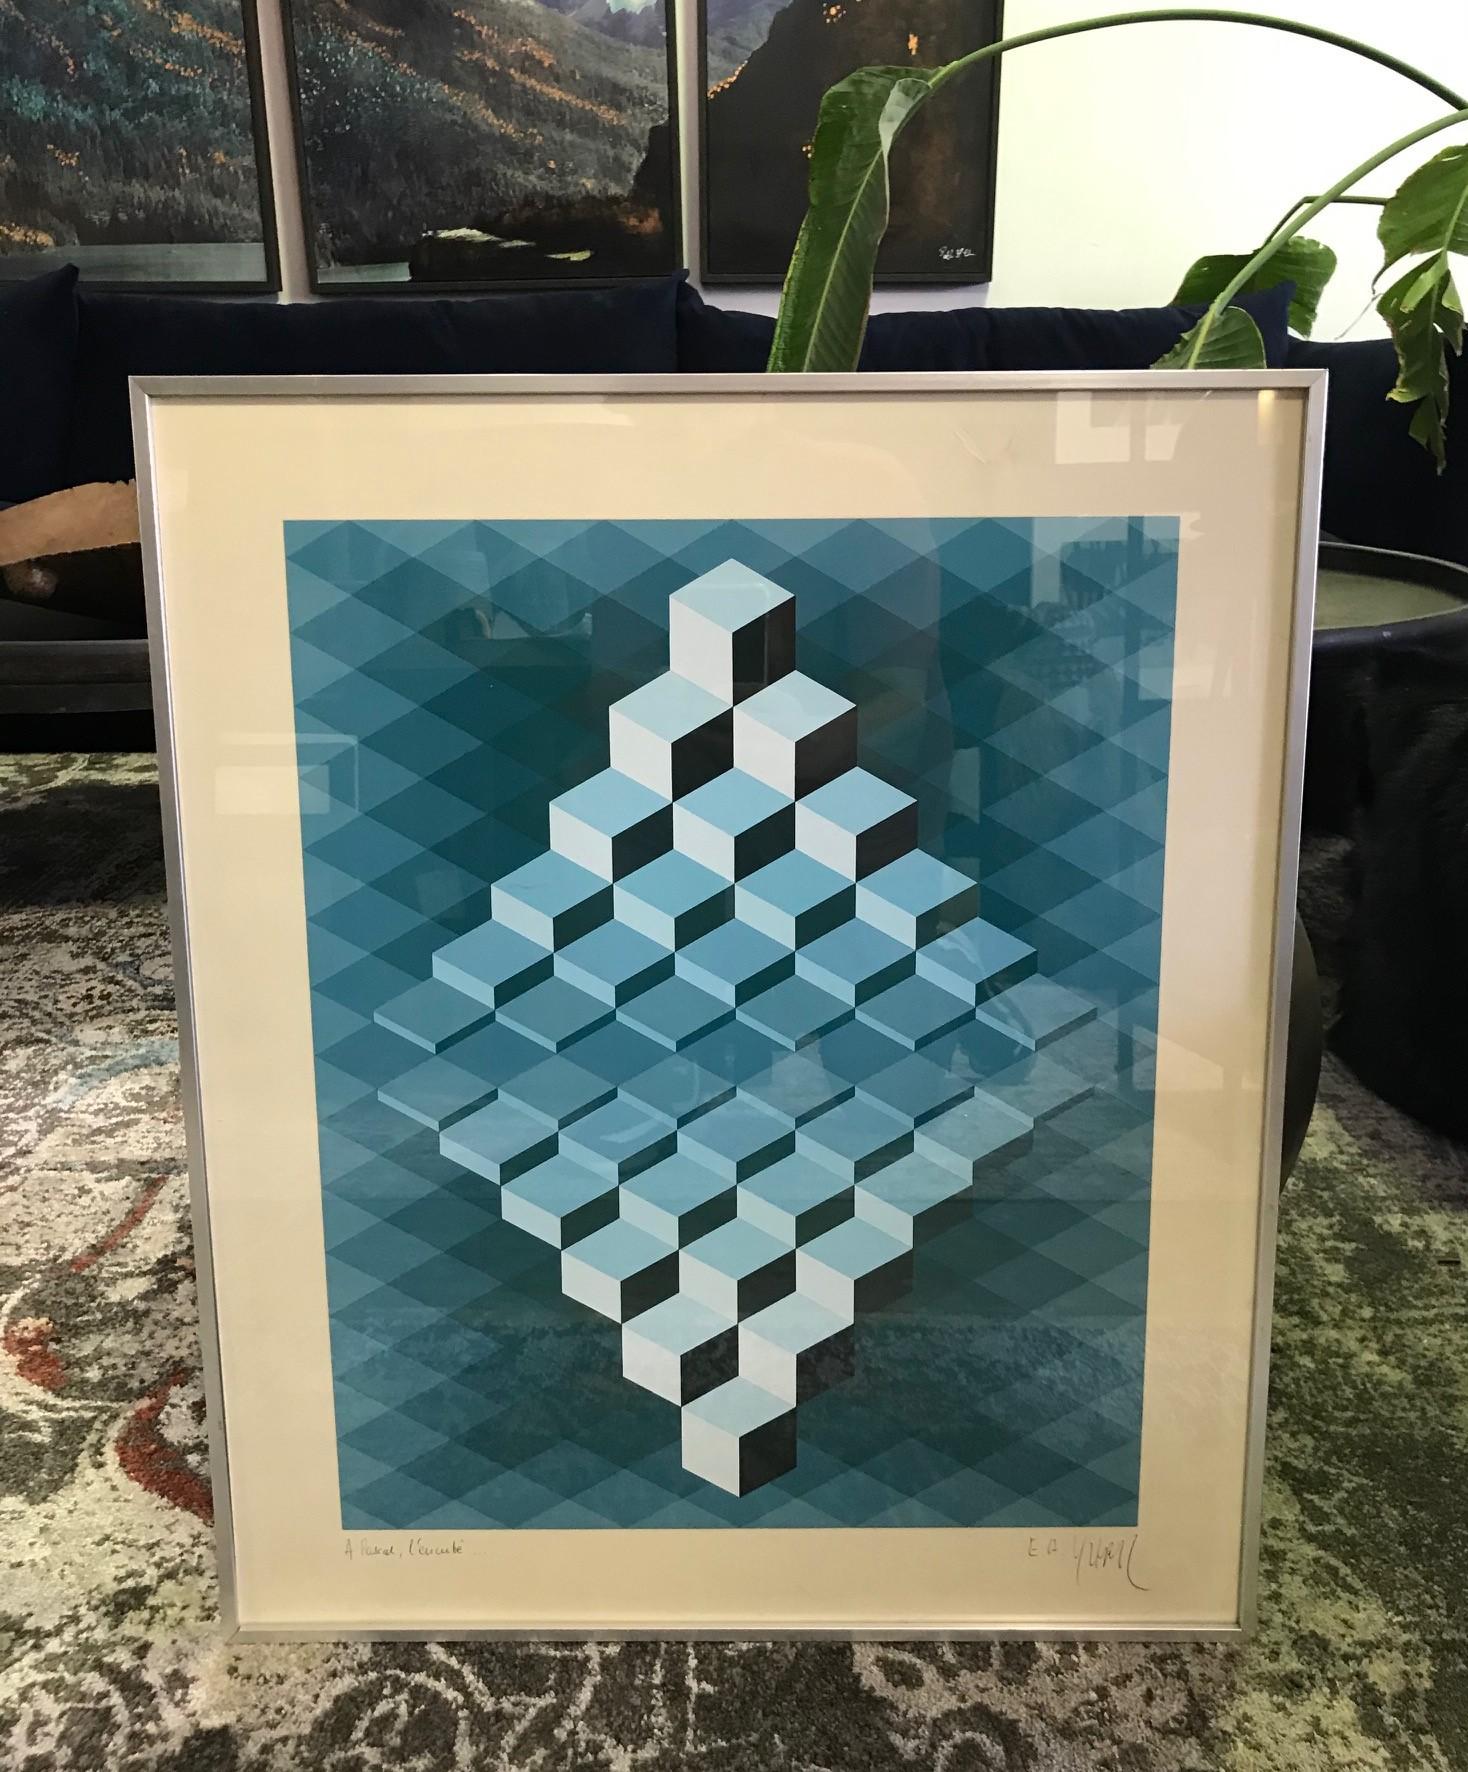 Known professionally as Yvaral, French artist Jean-Pierre Vasarely was the son of opt art pioneer Victor Vasarely. Yvaral continued his father's legacy working in both the opt-art and kinectic art fields He co-founded the Groupe de Recherche d’Art